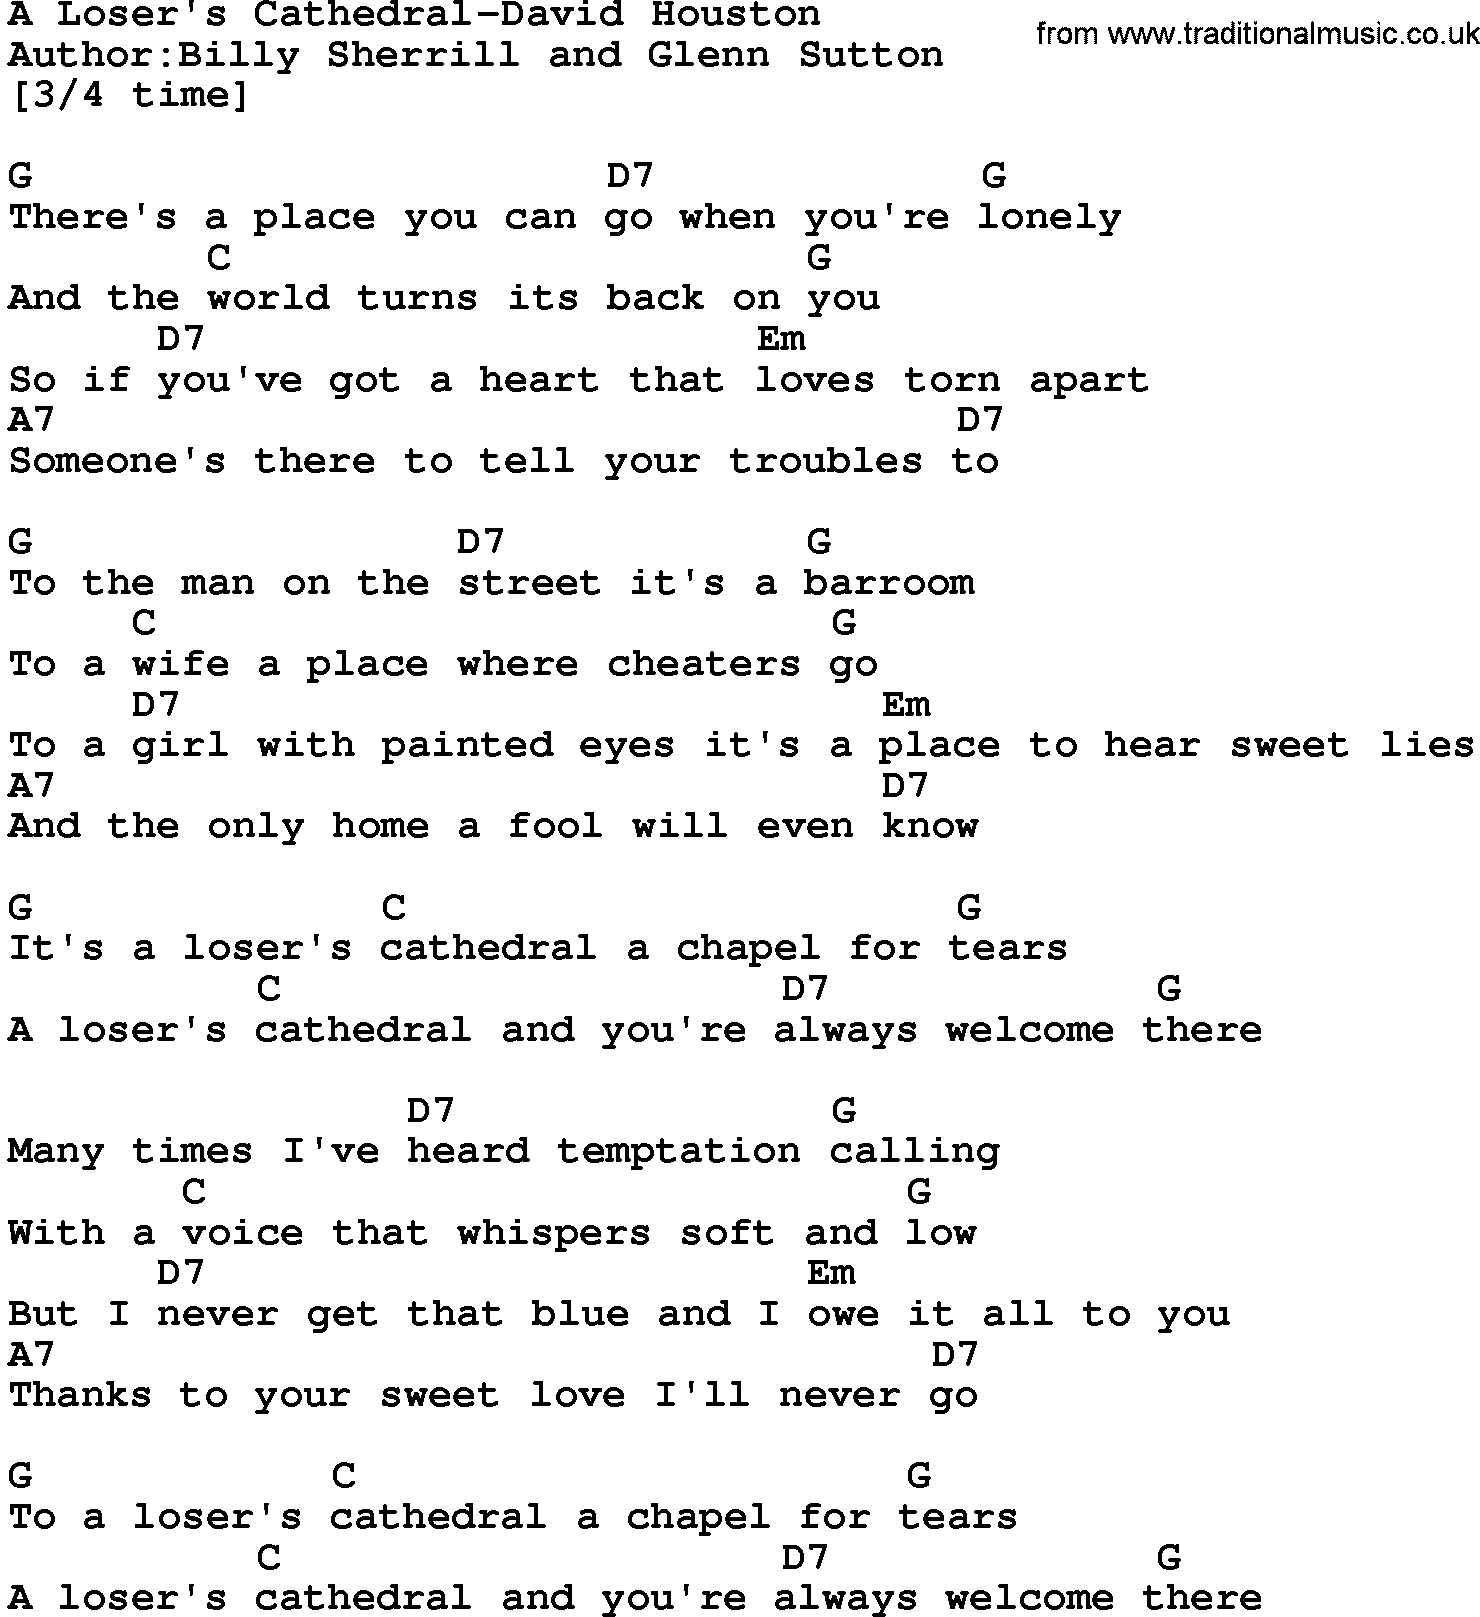 Country music song: A Loser's Cathedral-David Houston lyrics and chords